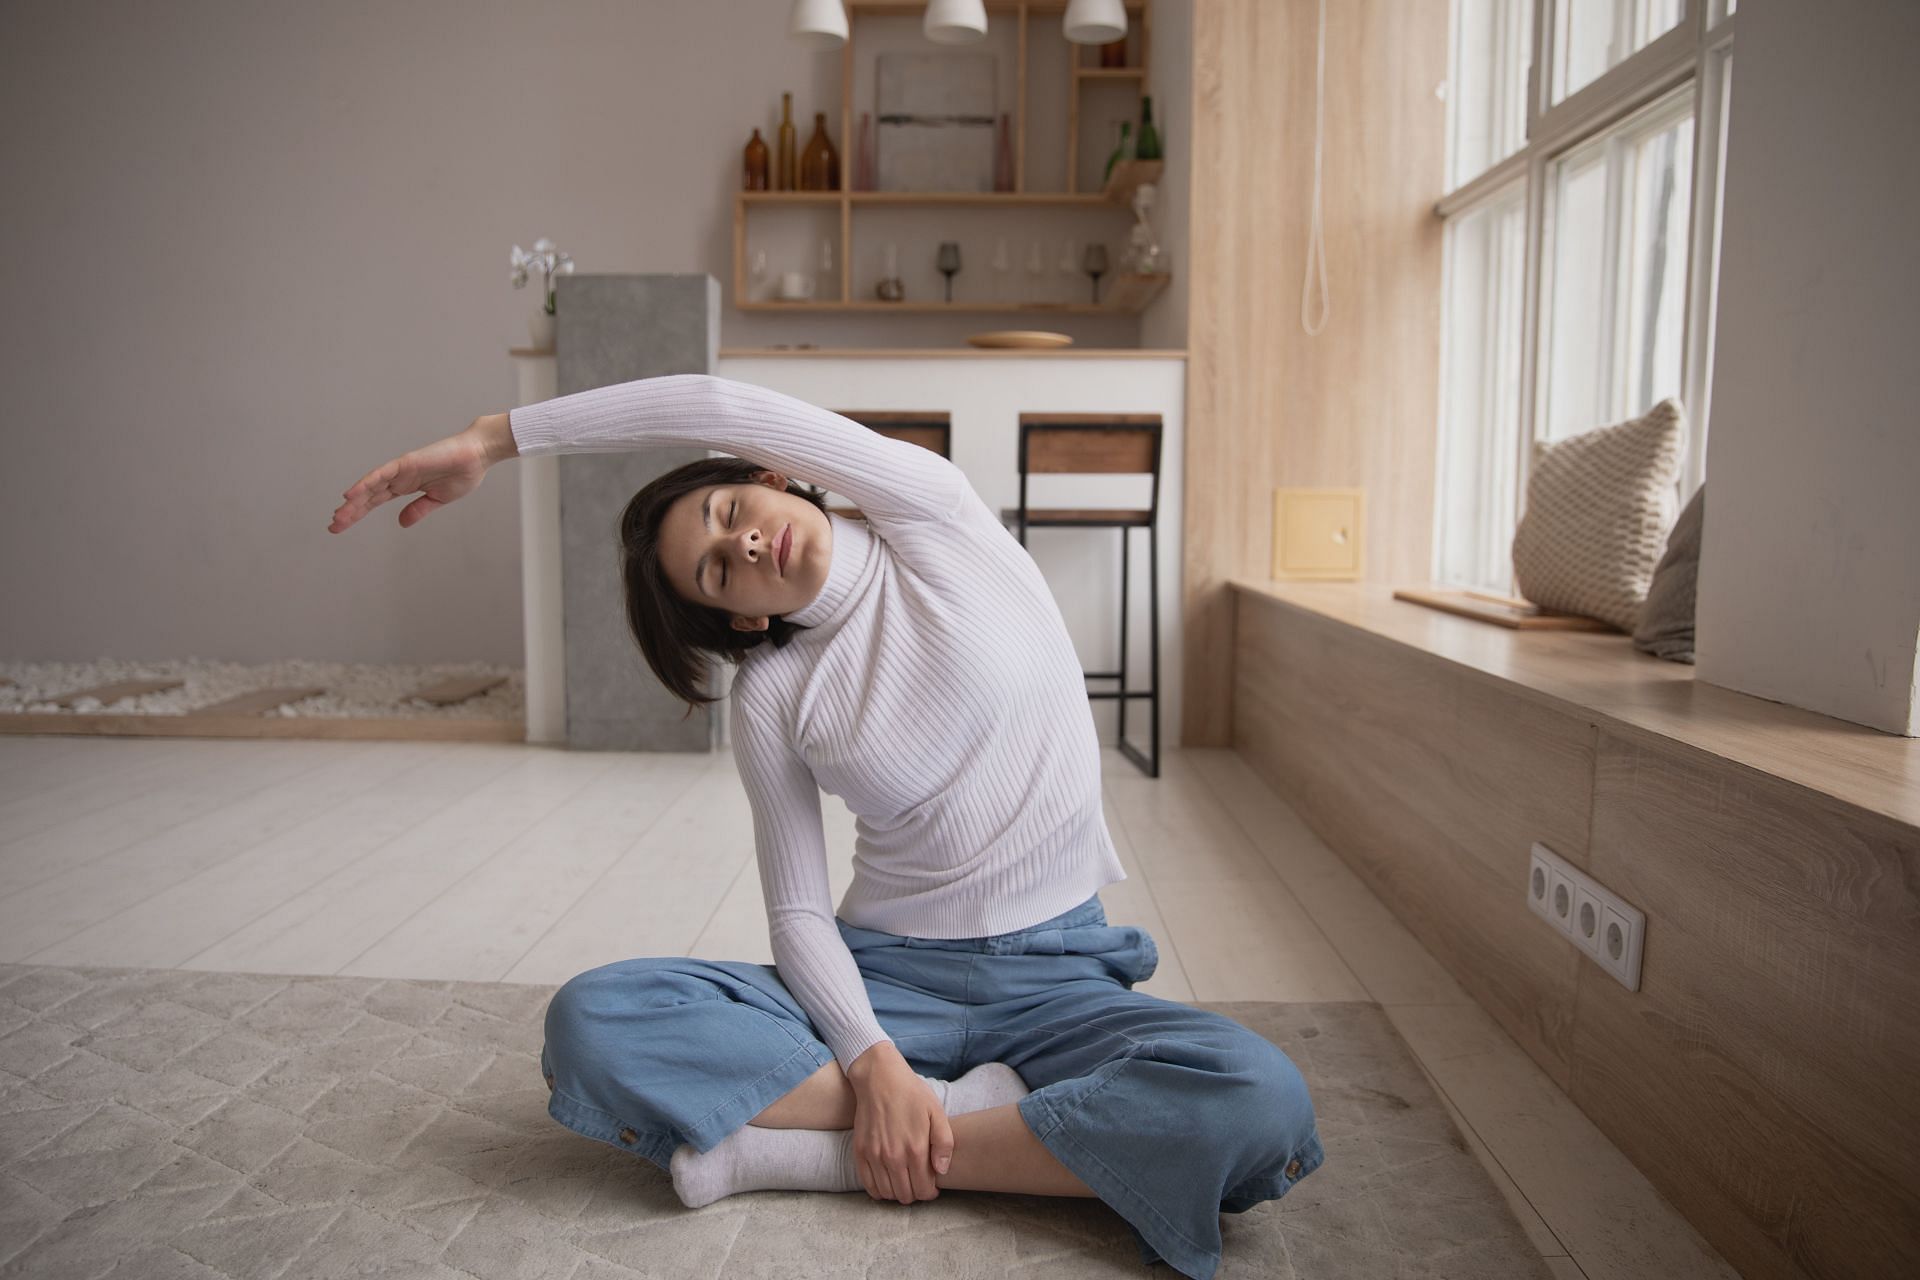 Stretching can be done while sitting or standing. (Image via Pexels/ Ekaterina Bolovtsova)